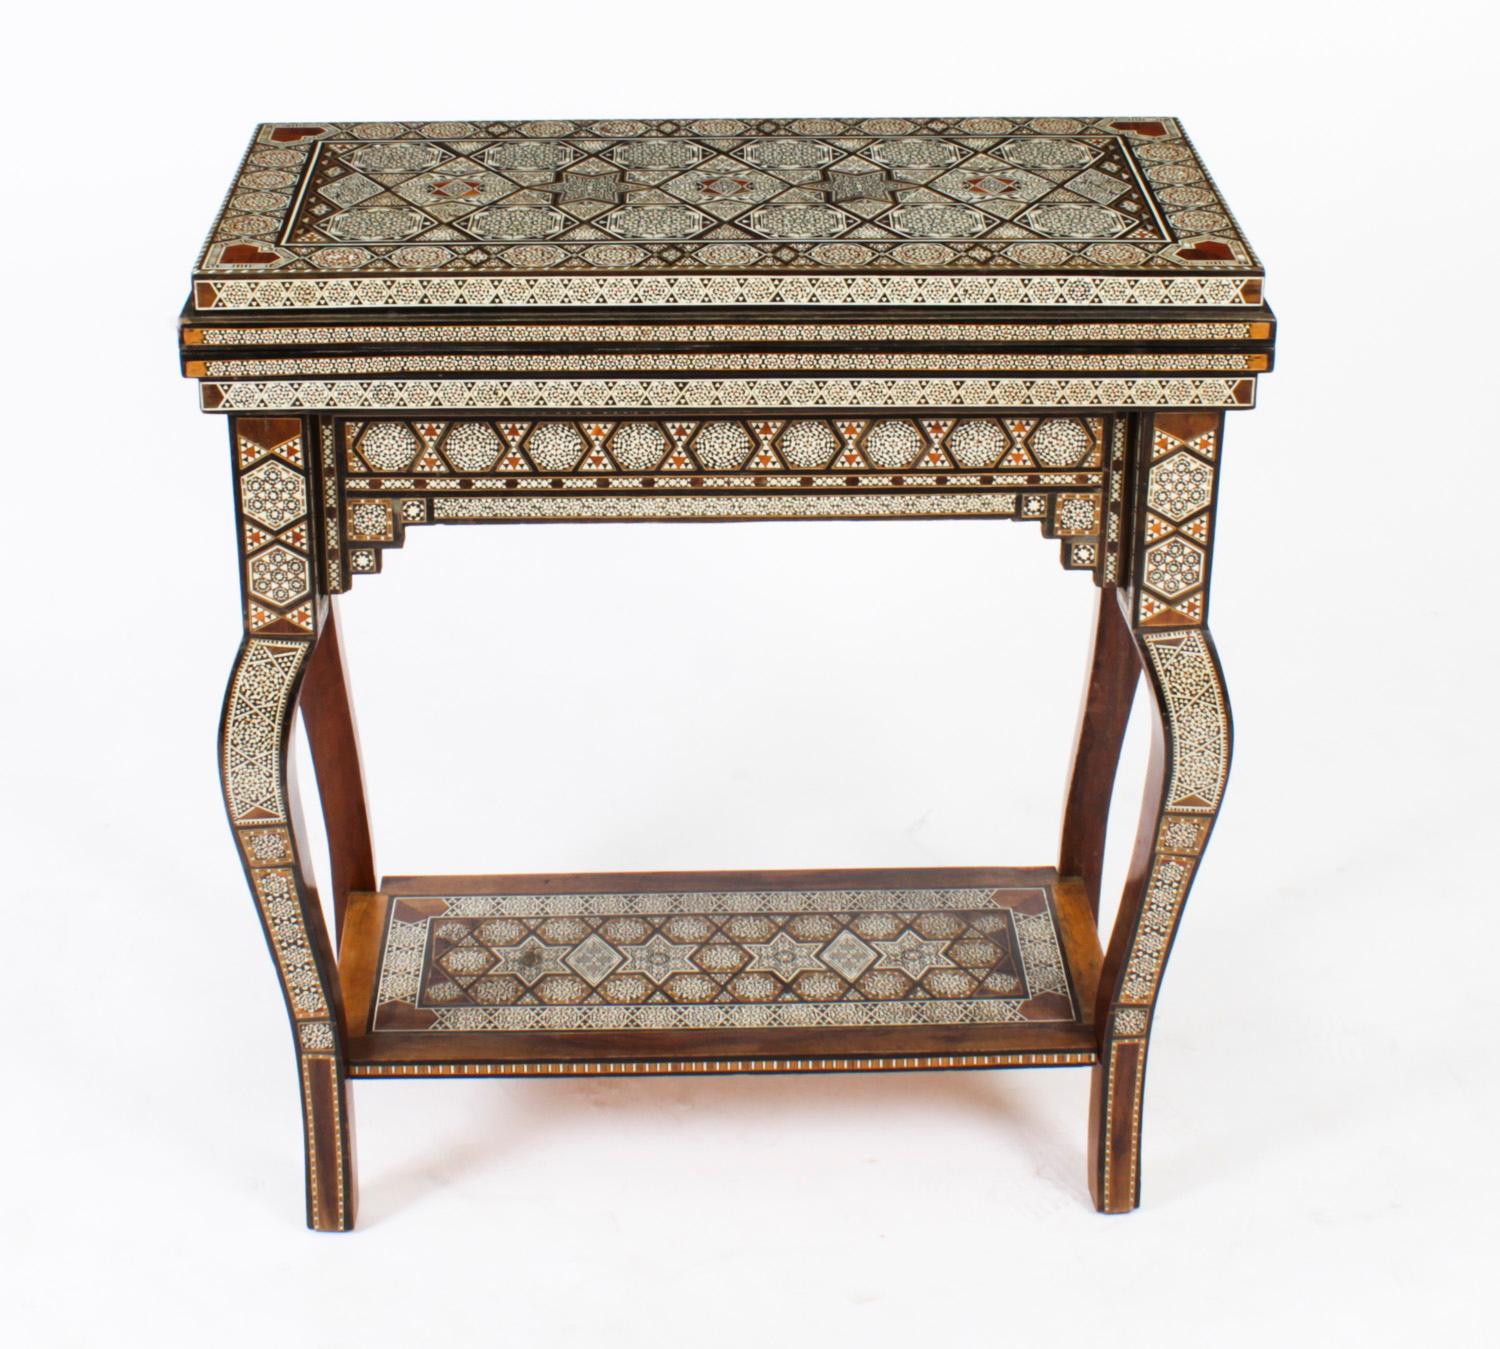 This profusely inlaid Syrian Damascus games table dates from Circa 1910, and has multiple geometric and asymmetric inlays of various exotic veneers.
 
The hinged lid opens to reveal a similarly inlaid interior and a removable reversible top with